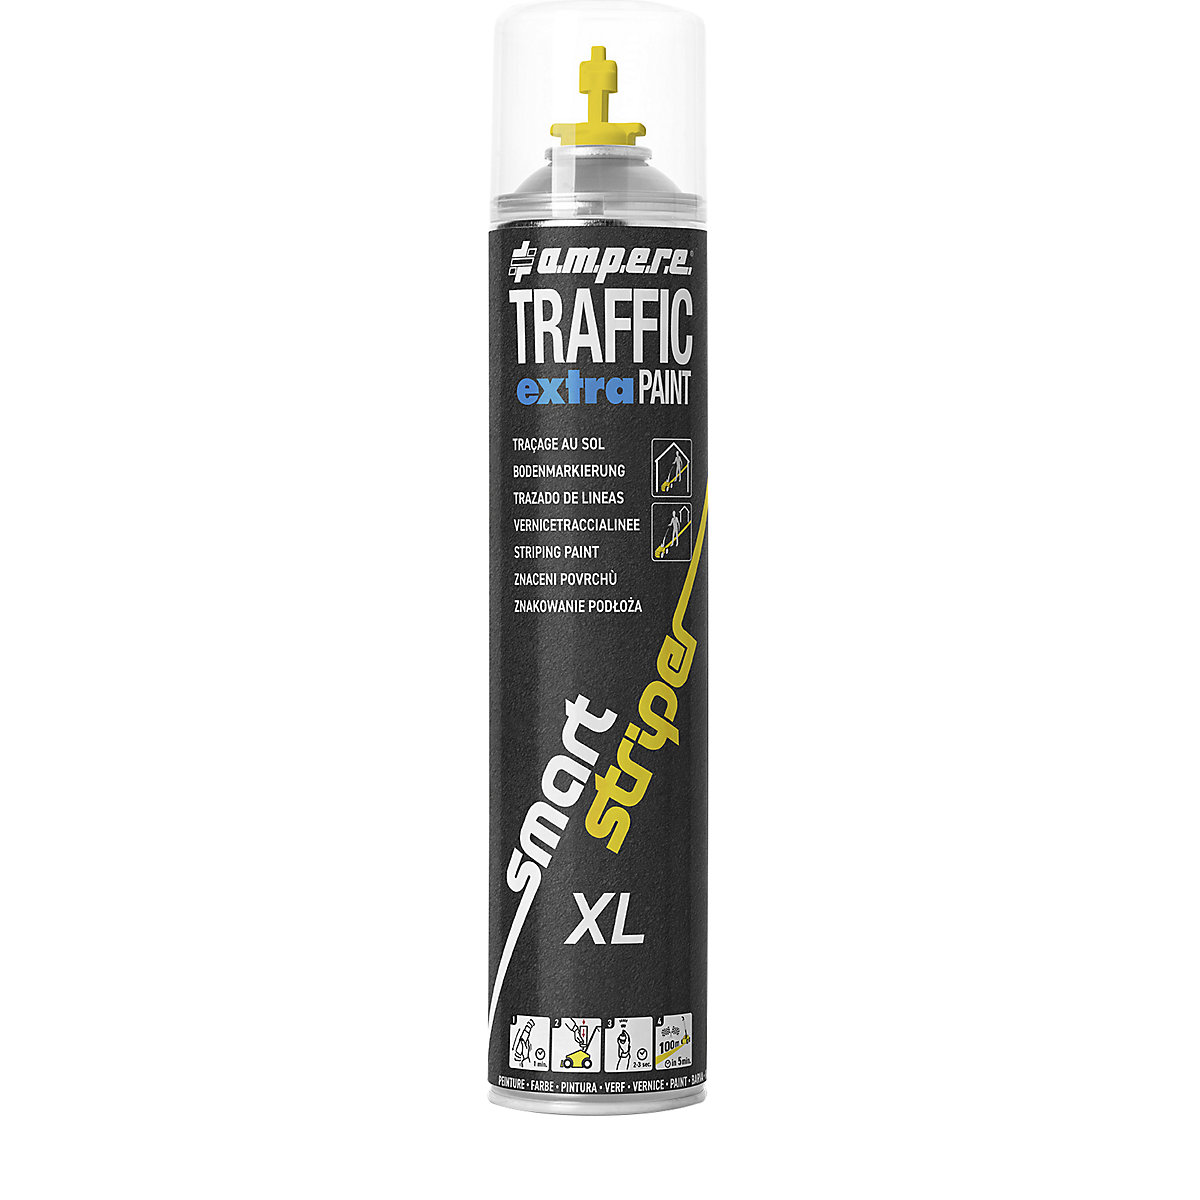 Traffic extra Paint® XL marking paint – Ampere, contents 750 ml, pack of 6, yellow-5